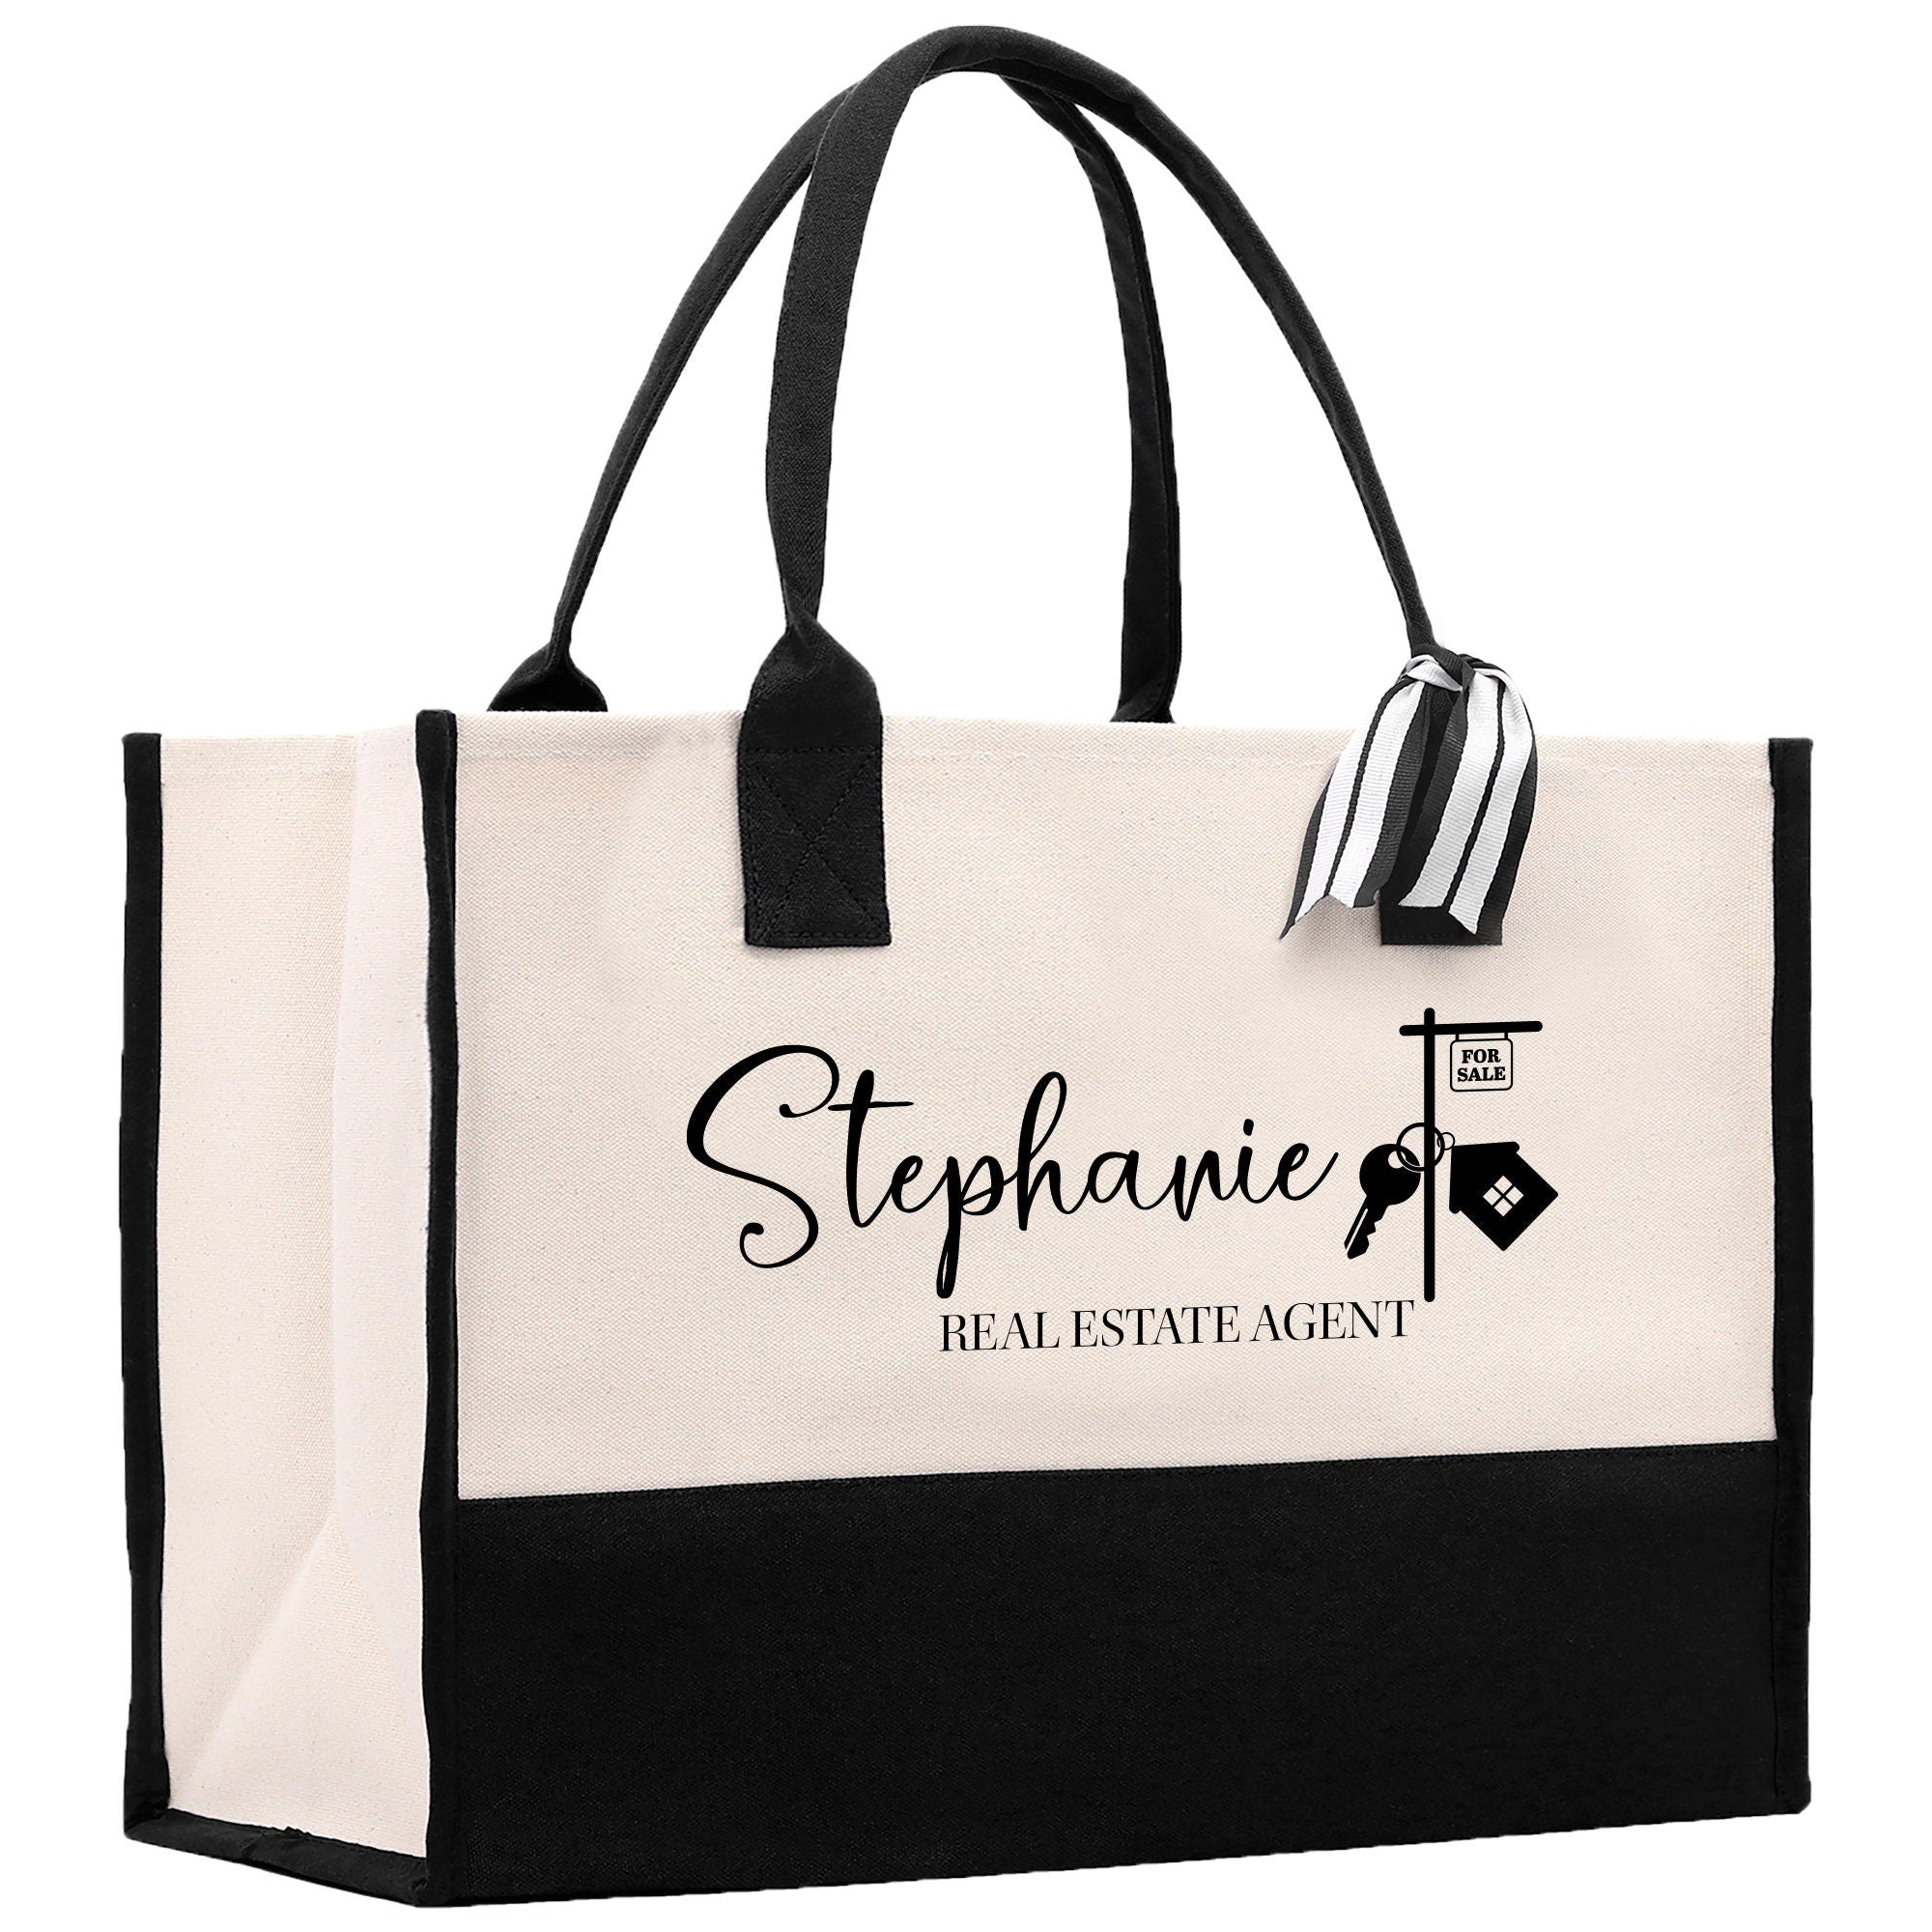 a black and white tote bag with a logo on it